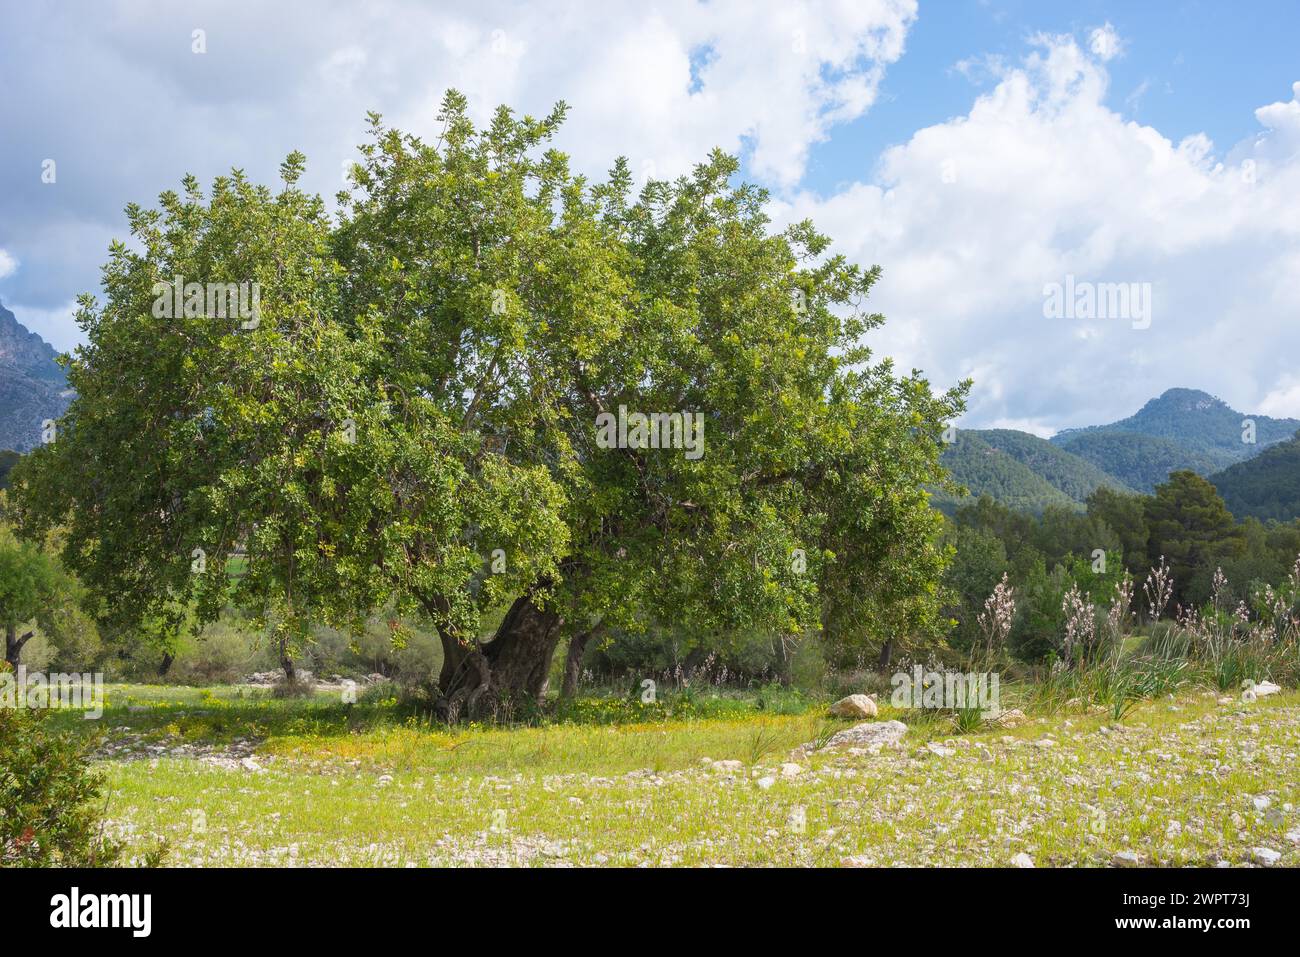 Holm oak (Quercus ilex) or holm oak, very old, solitary tree growing on a barren pasture with stony limestone soil and blooming flowers, affodill Stock Photo